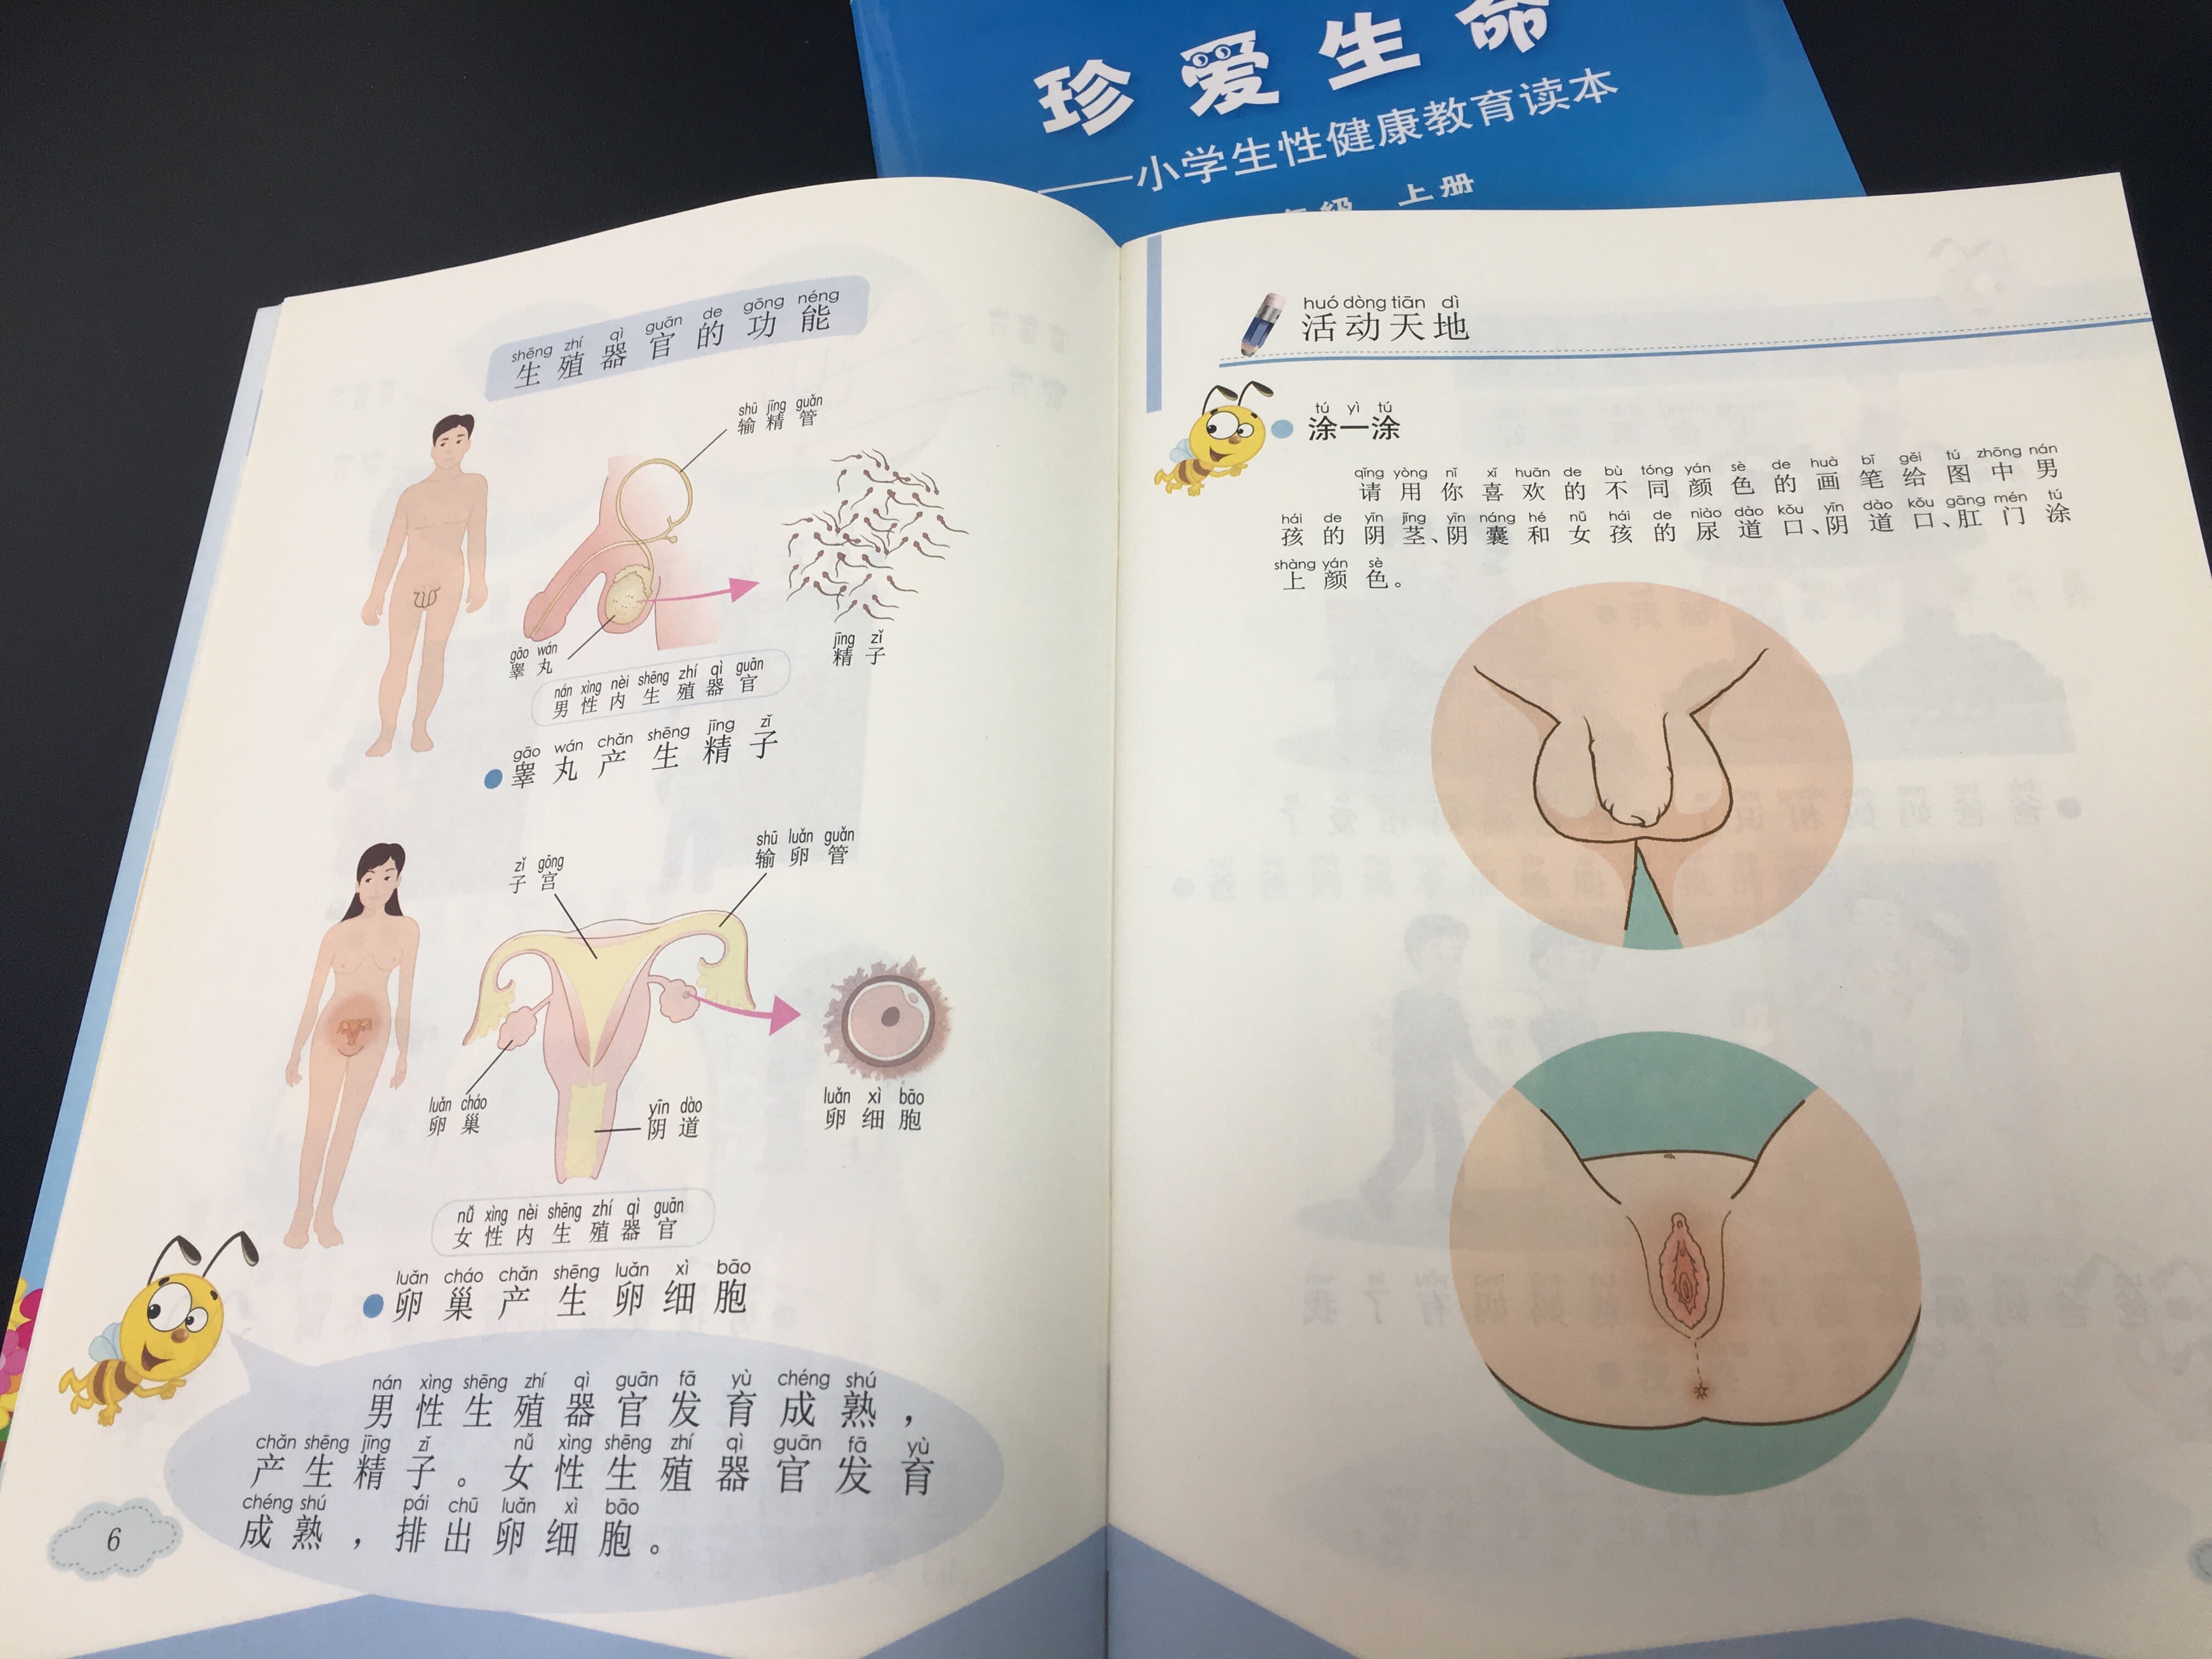 Chinese Sex School - Shock and praise for groundbreaking sex-ed textbook in China | CNN